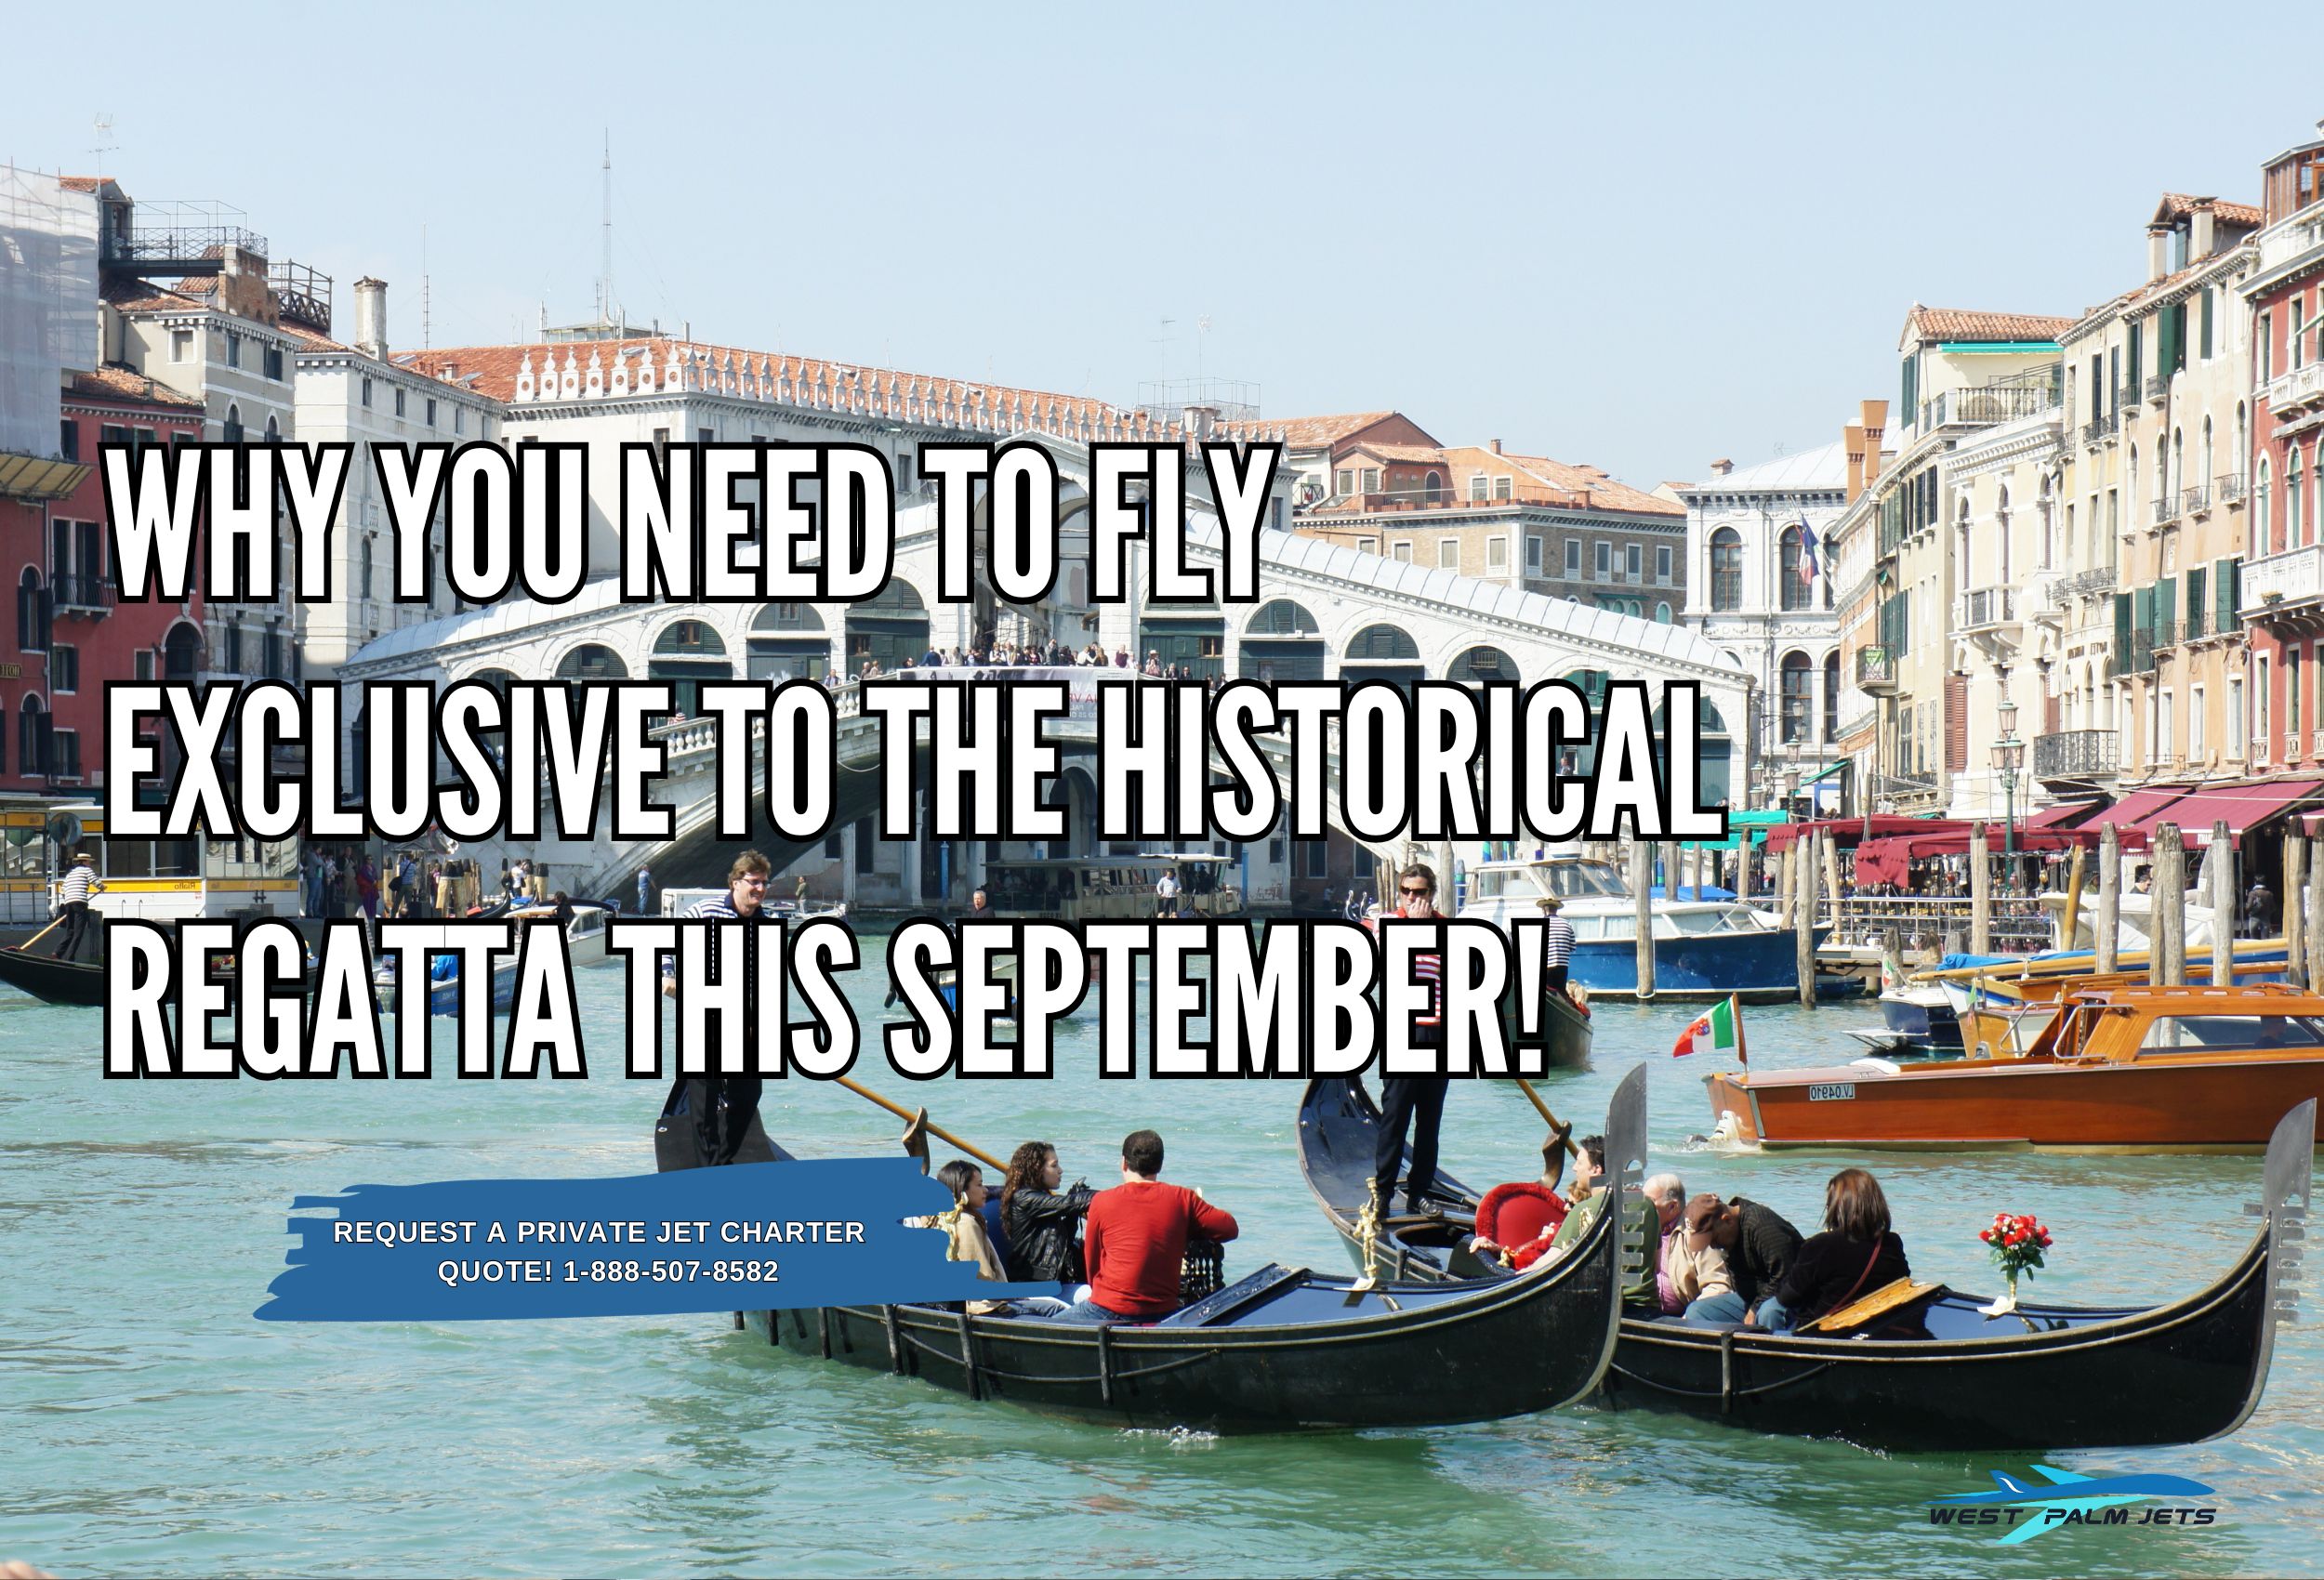 Why You Need to Fly Exclusive to the Historical Regatta This September!